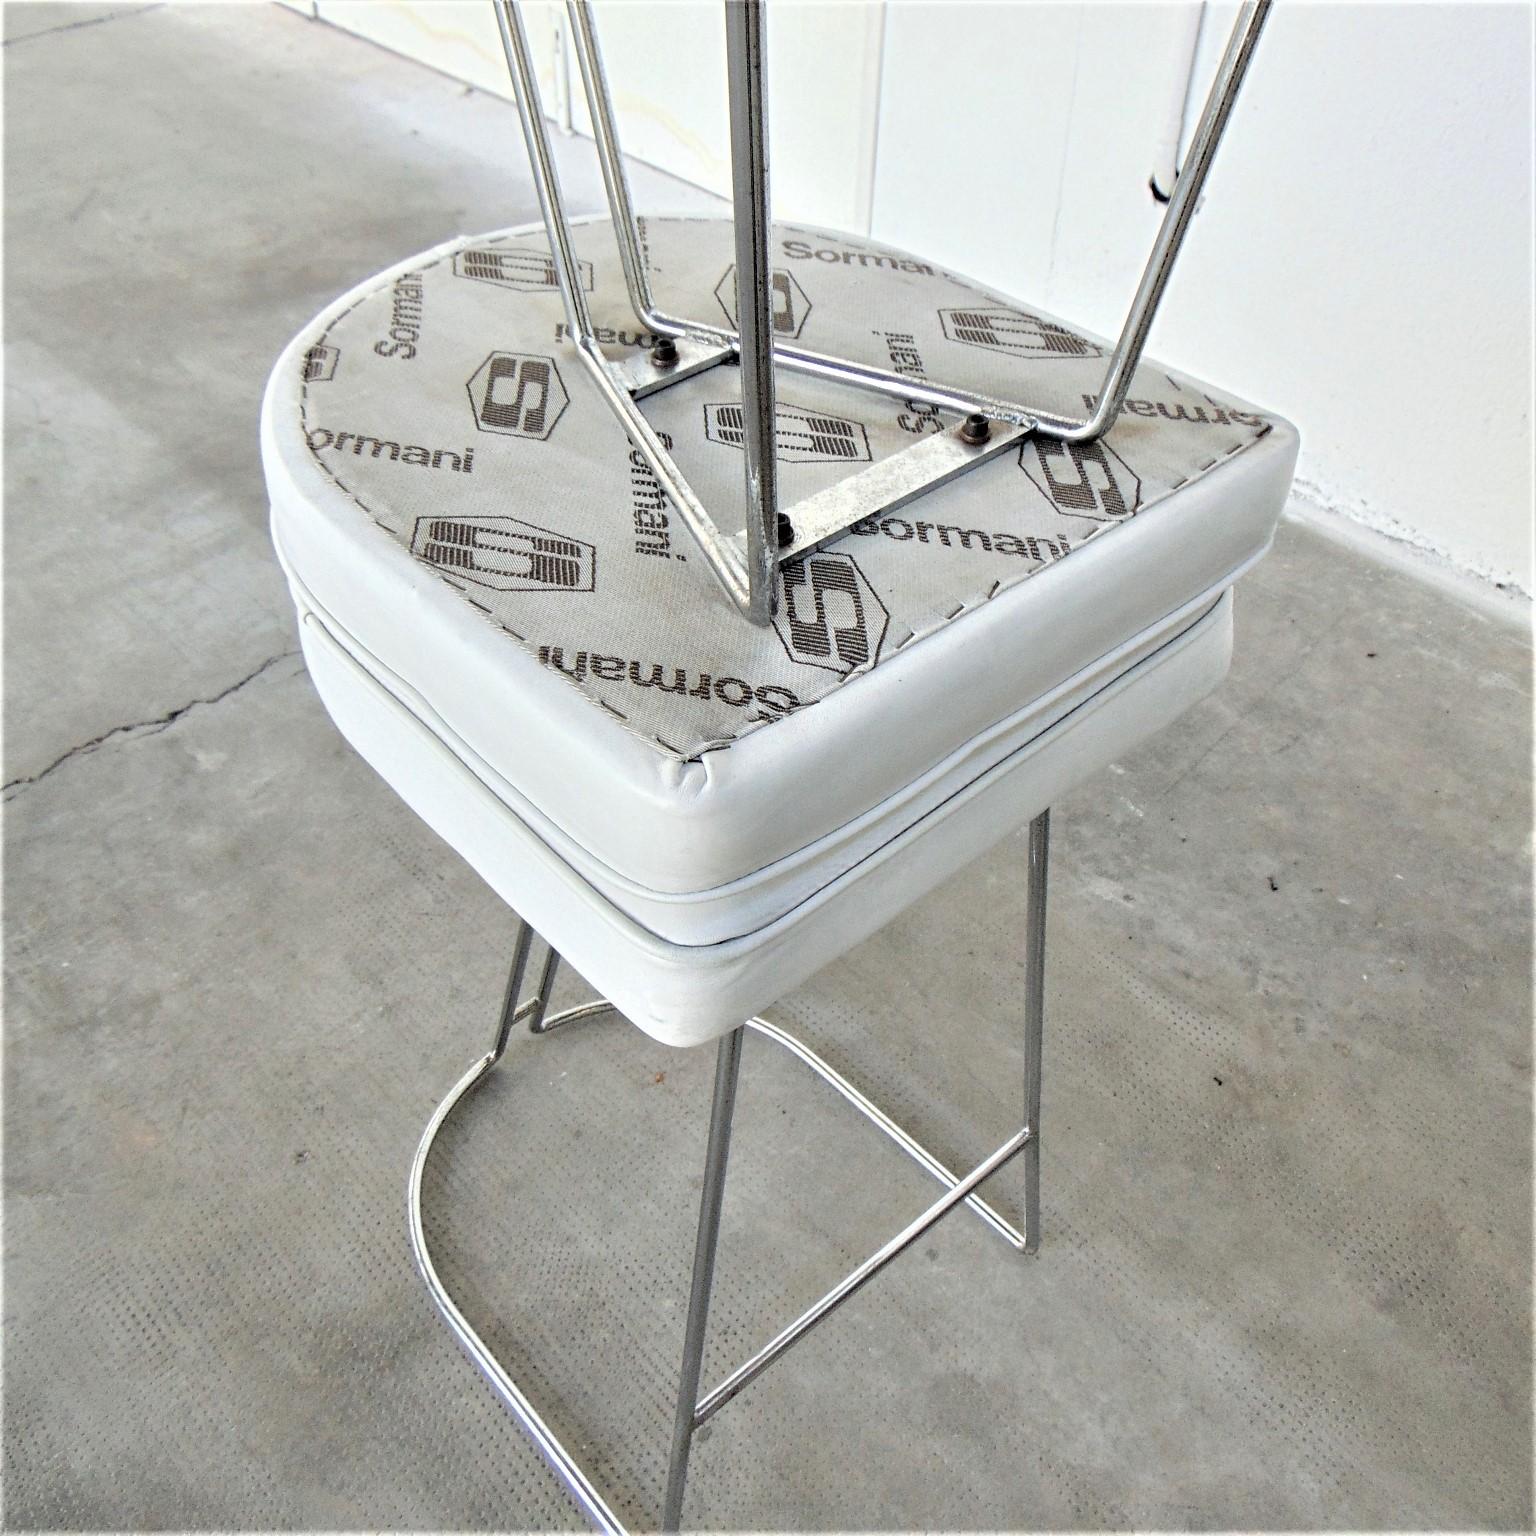 1983 Barstools Set White Leather and Chromed Steel by Sormani, Italy For Sale 6